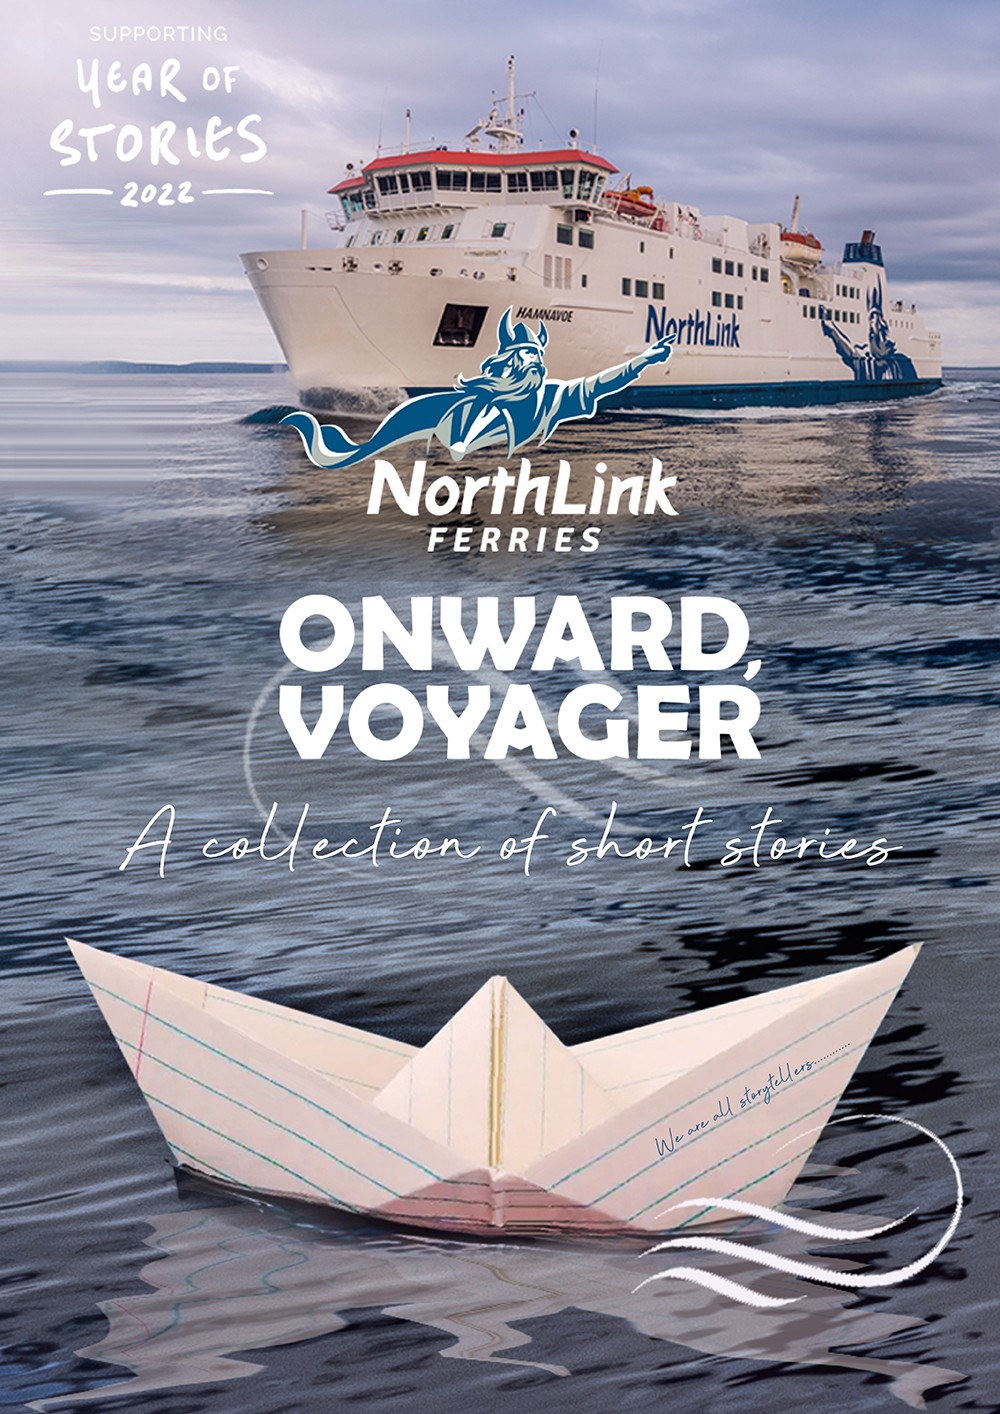 Book front cover with a sailing paper boat in foreground and northlink ferry behind